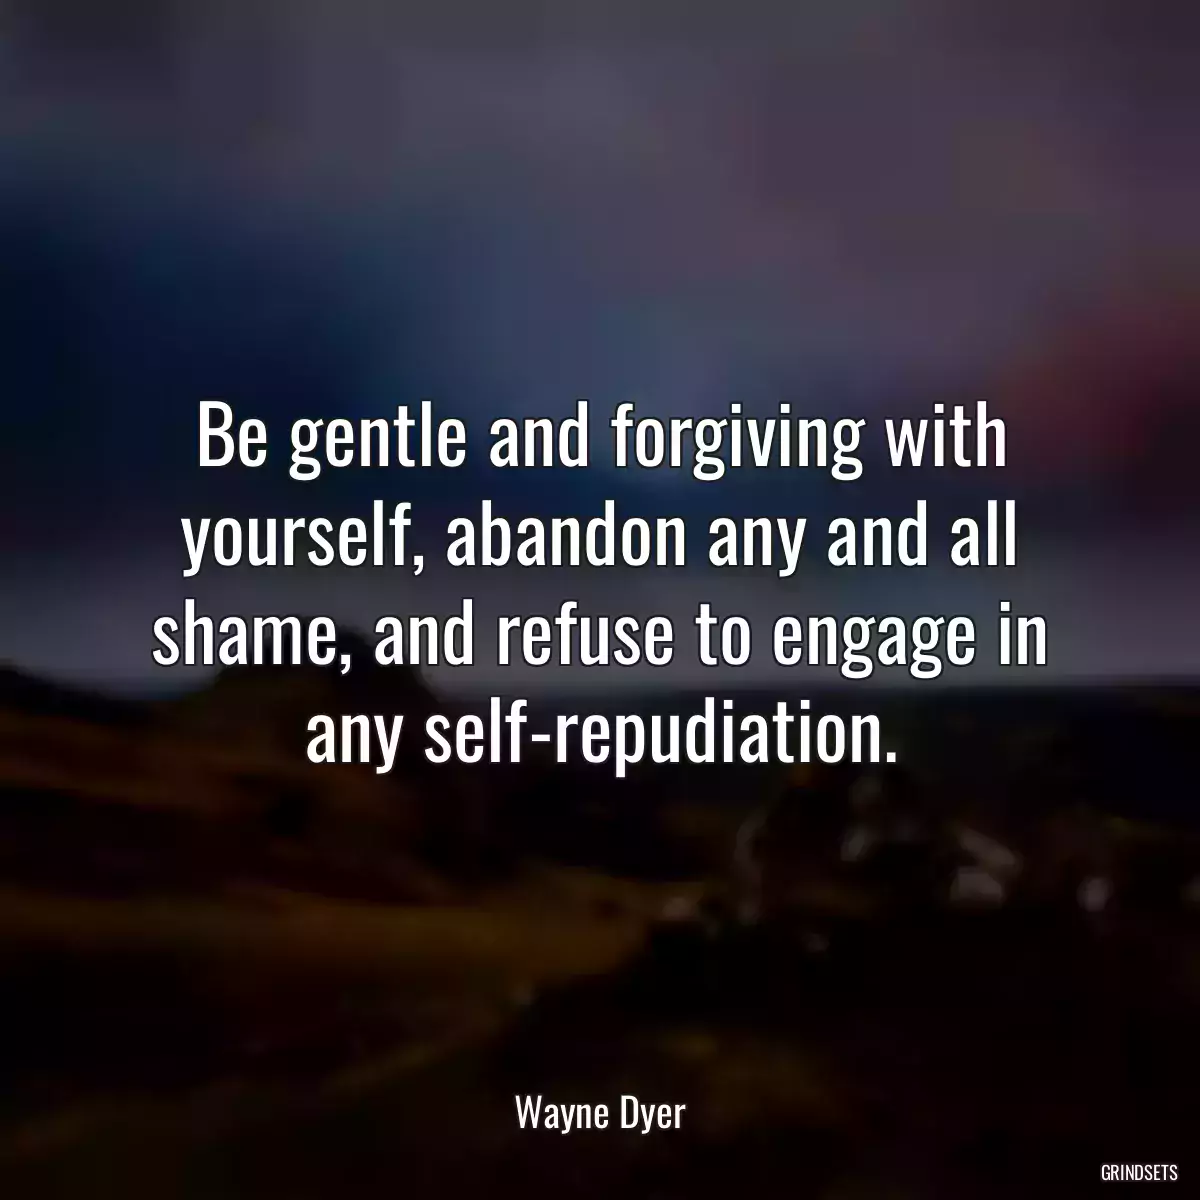 Be gentle and forgiving with yourself, abandon any and all shame, and refuse to engage in any self-repudiation.